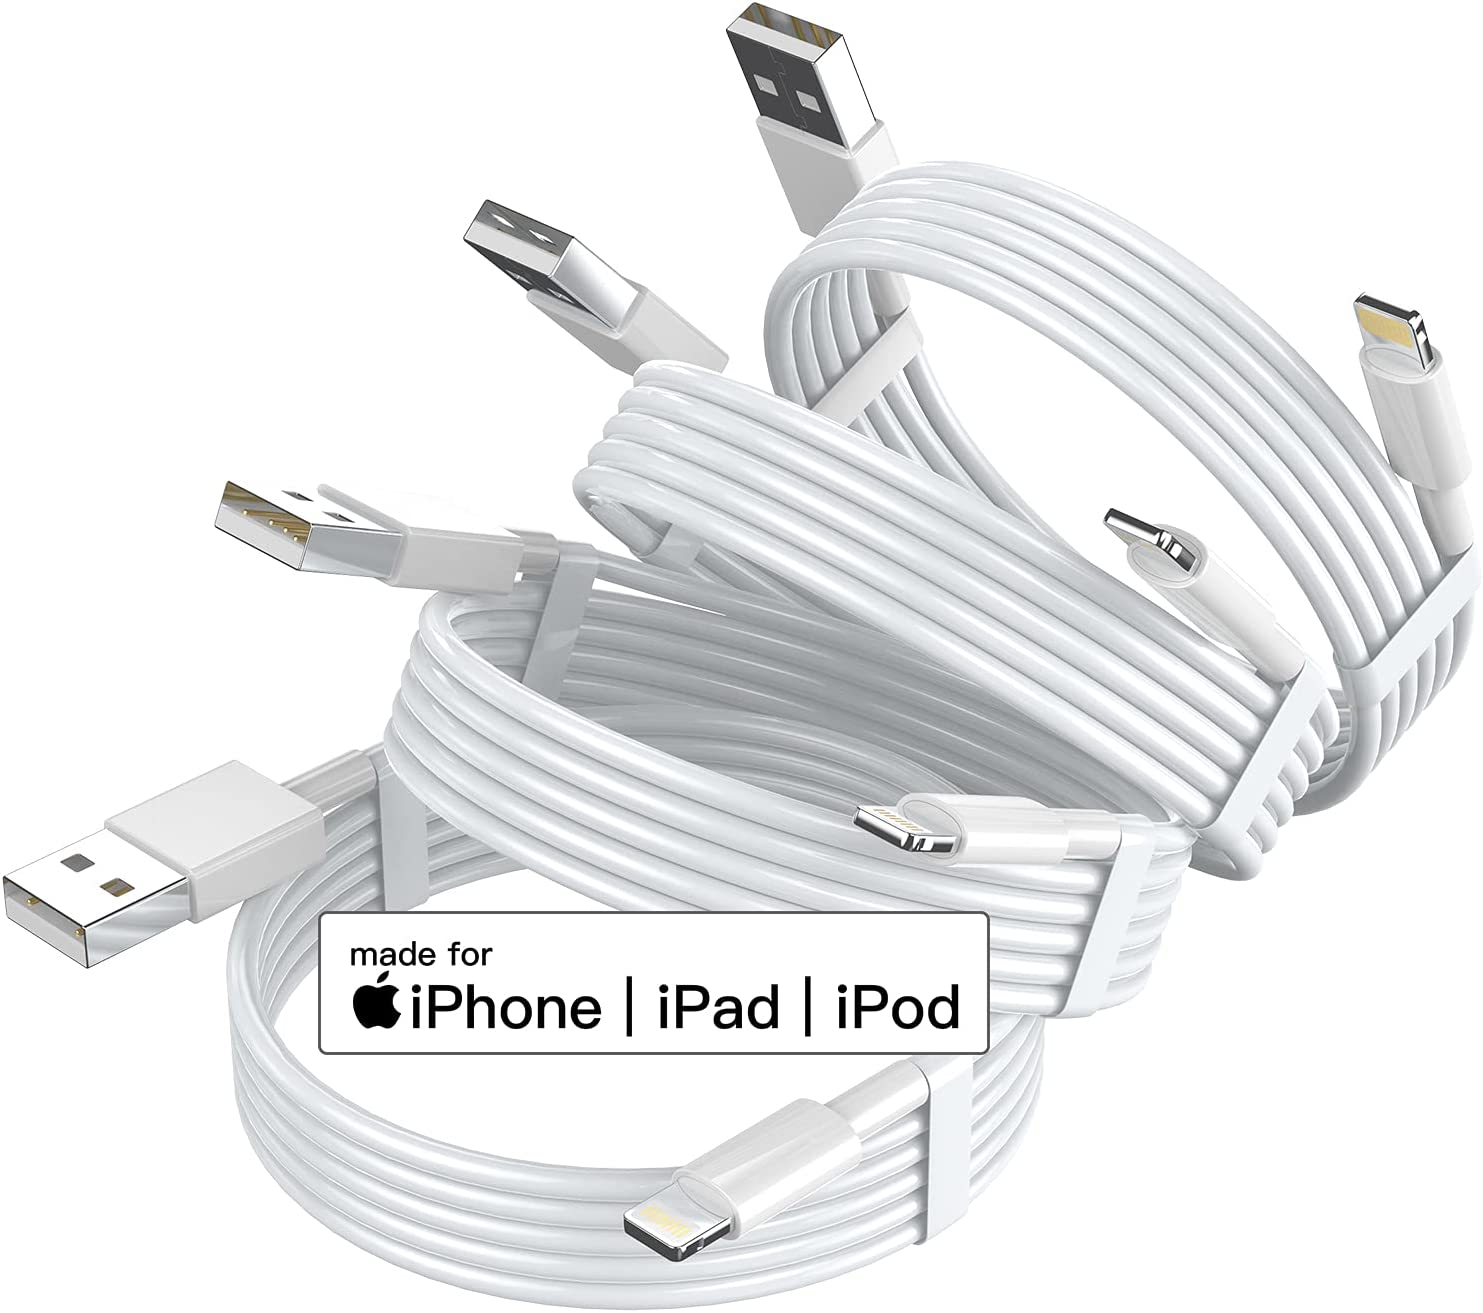 iPhone Charging Cable 3 ft 4 Pack, Lightning to USB Cable 3 Foot,Fast iPhone Charging Cables Cord for iPhone 14 Pro Max/13/12 Mini/11/XR/Xs/X/8/7/6/iPad Pro/Air/Mini-White